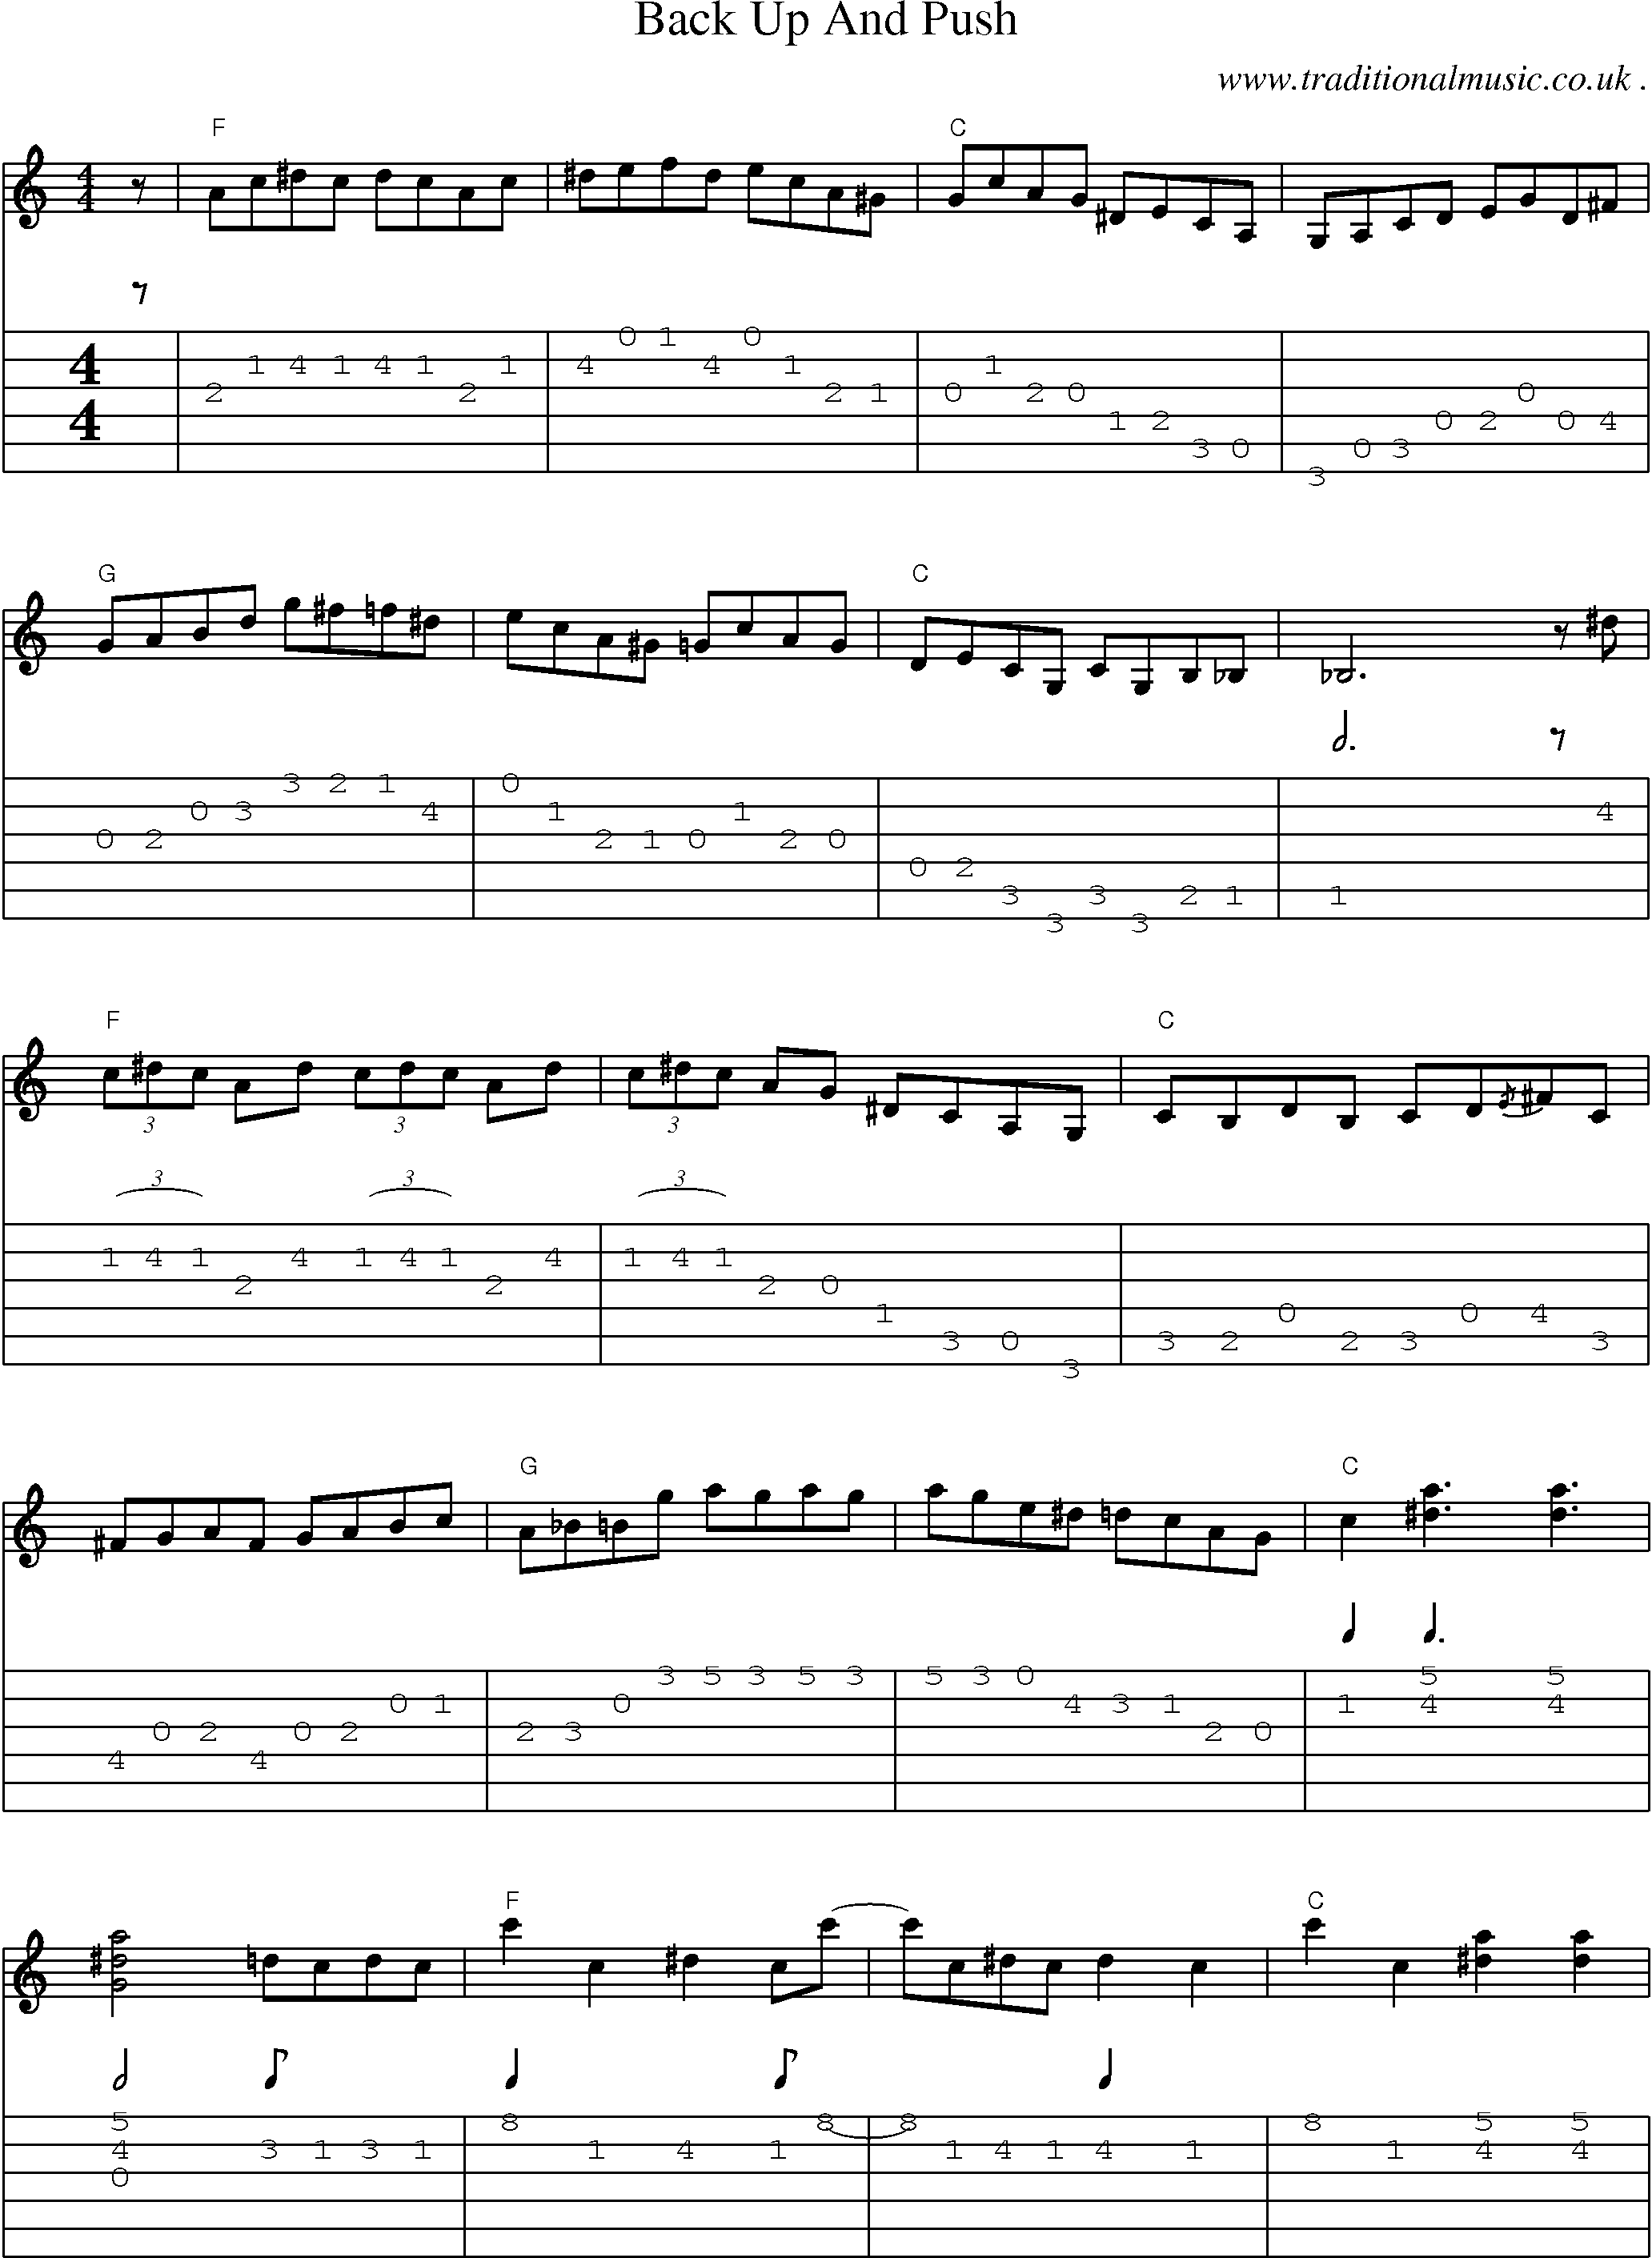 Music Score and Guitar Tabs for Back Up And Push